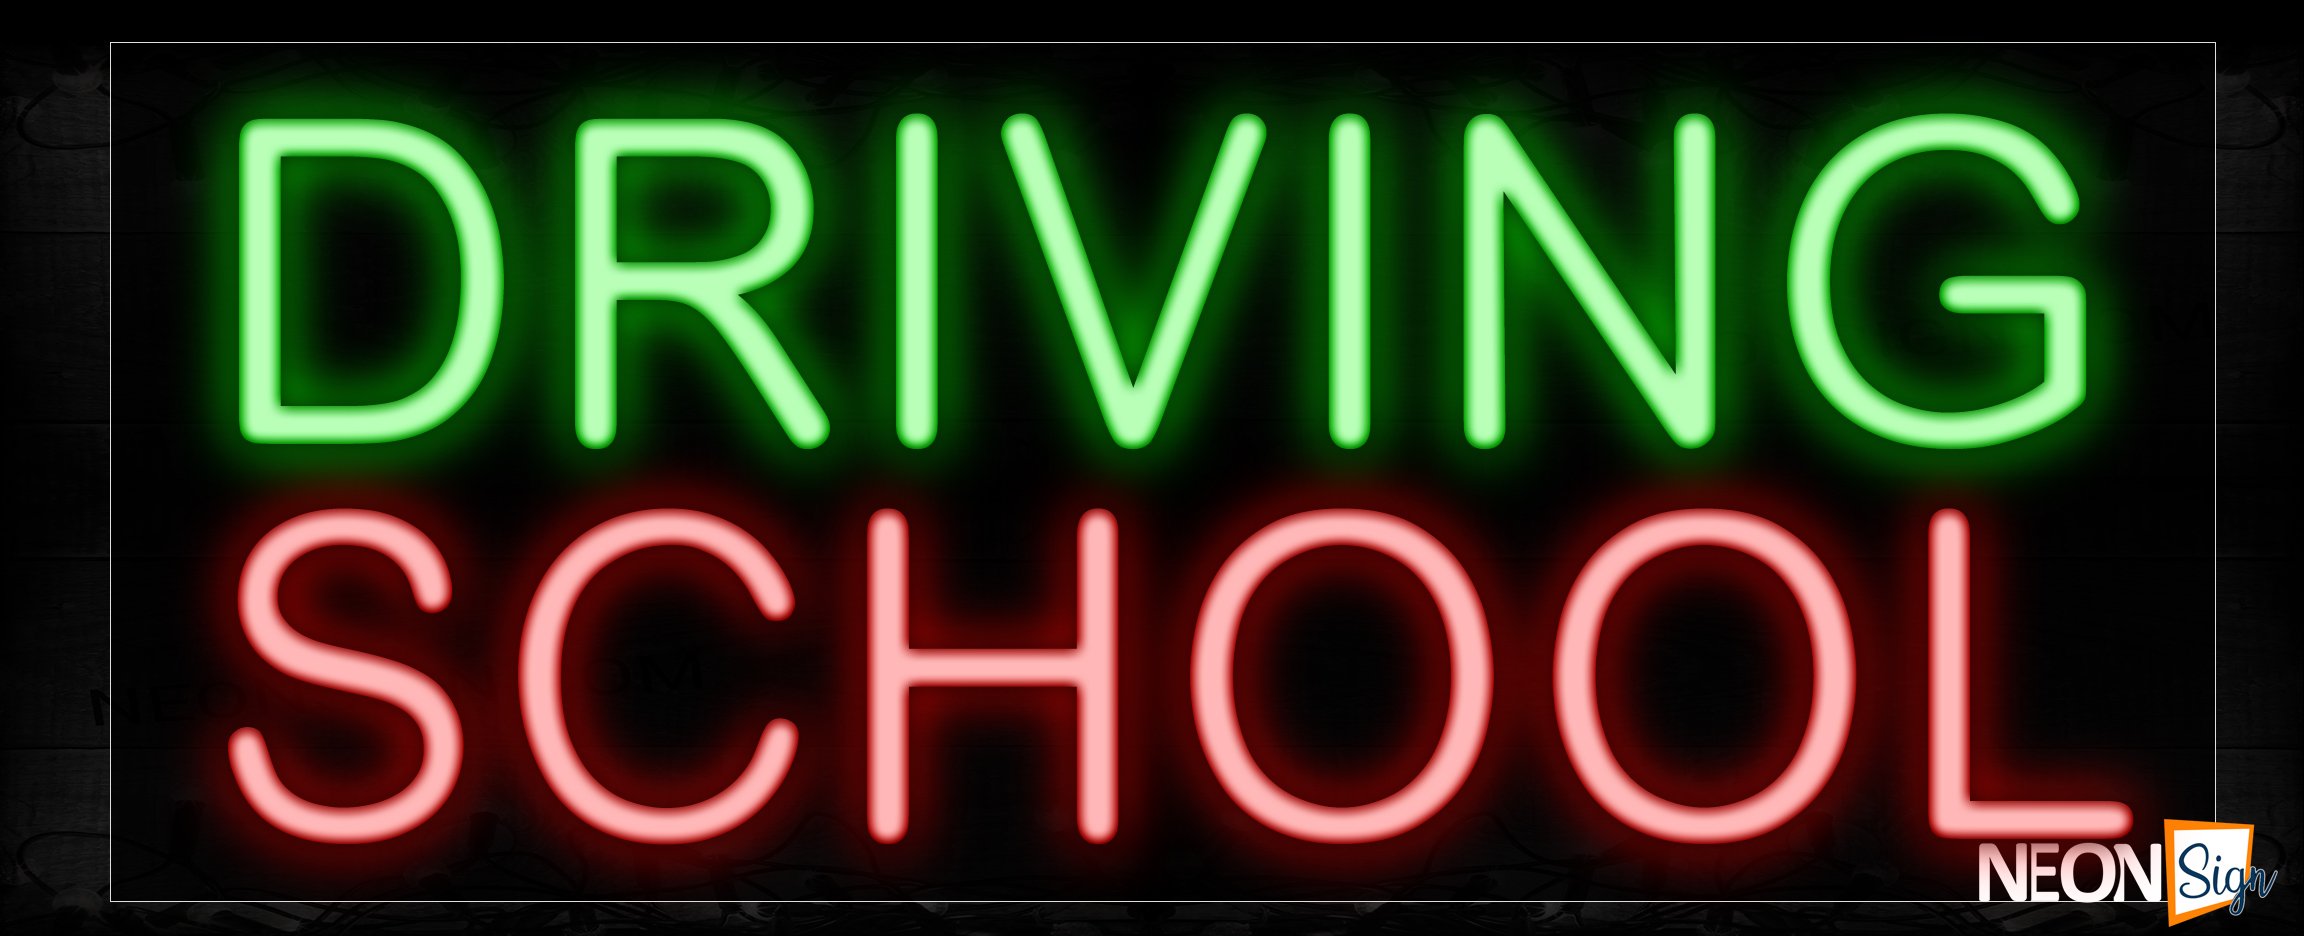 Image of 10541 driving school with border led bulb sign_13x32 Black Backing